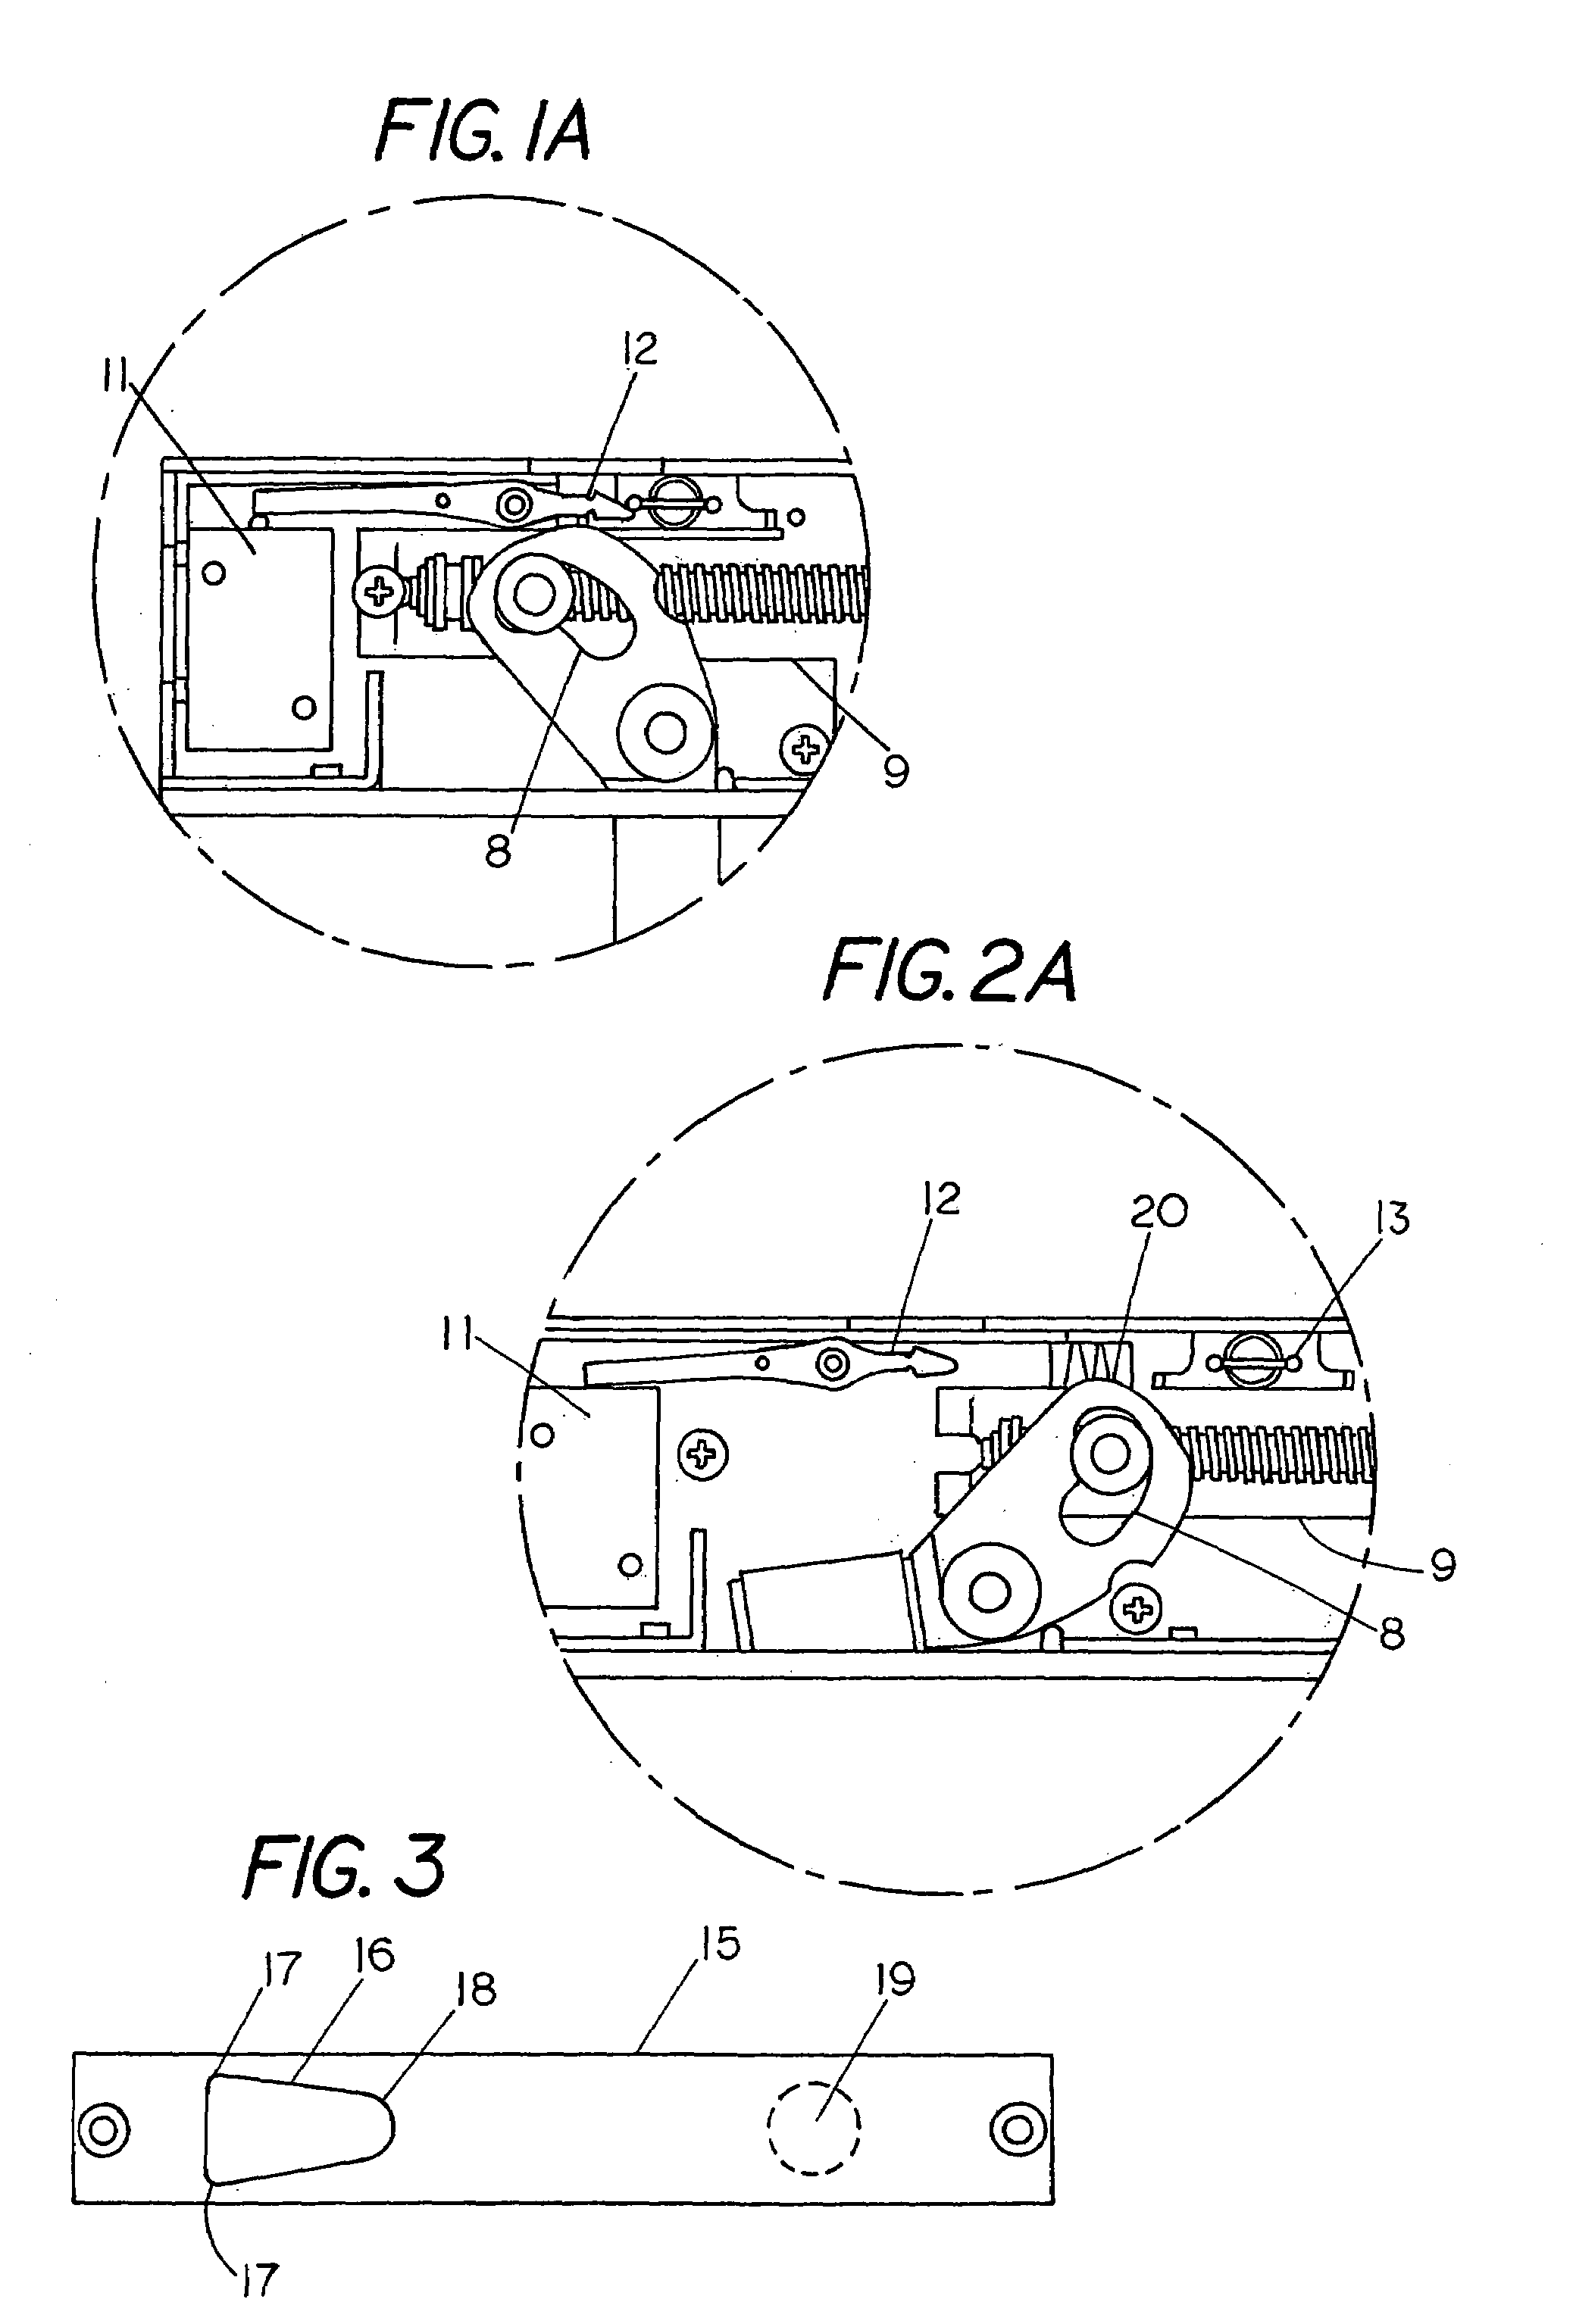 Electric drop bolt with slidable drive mechanism